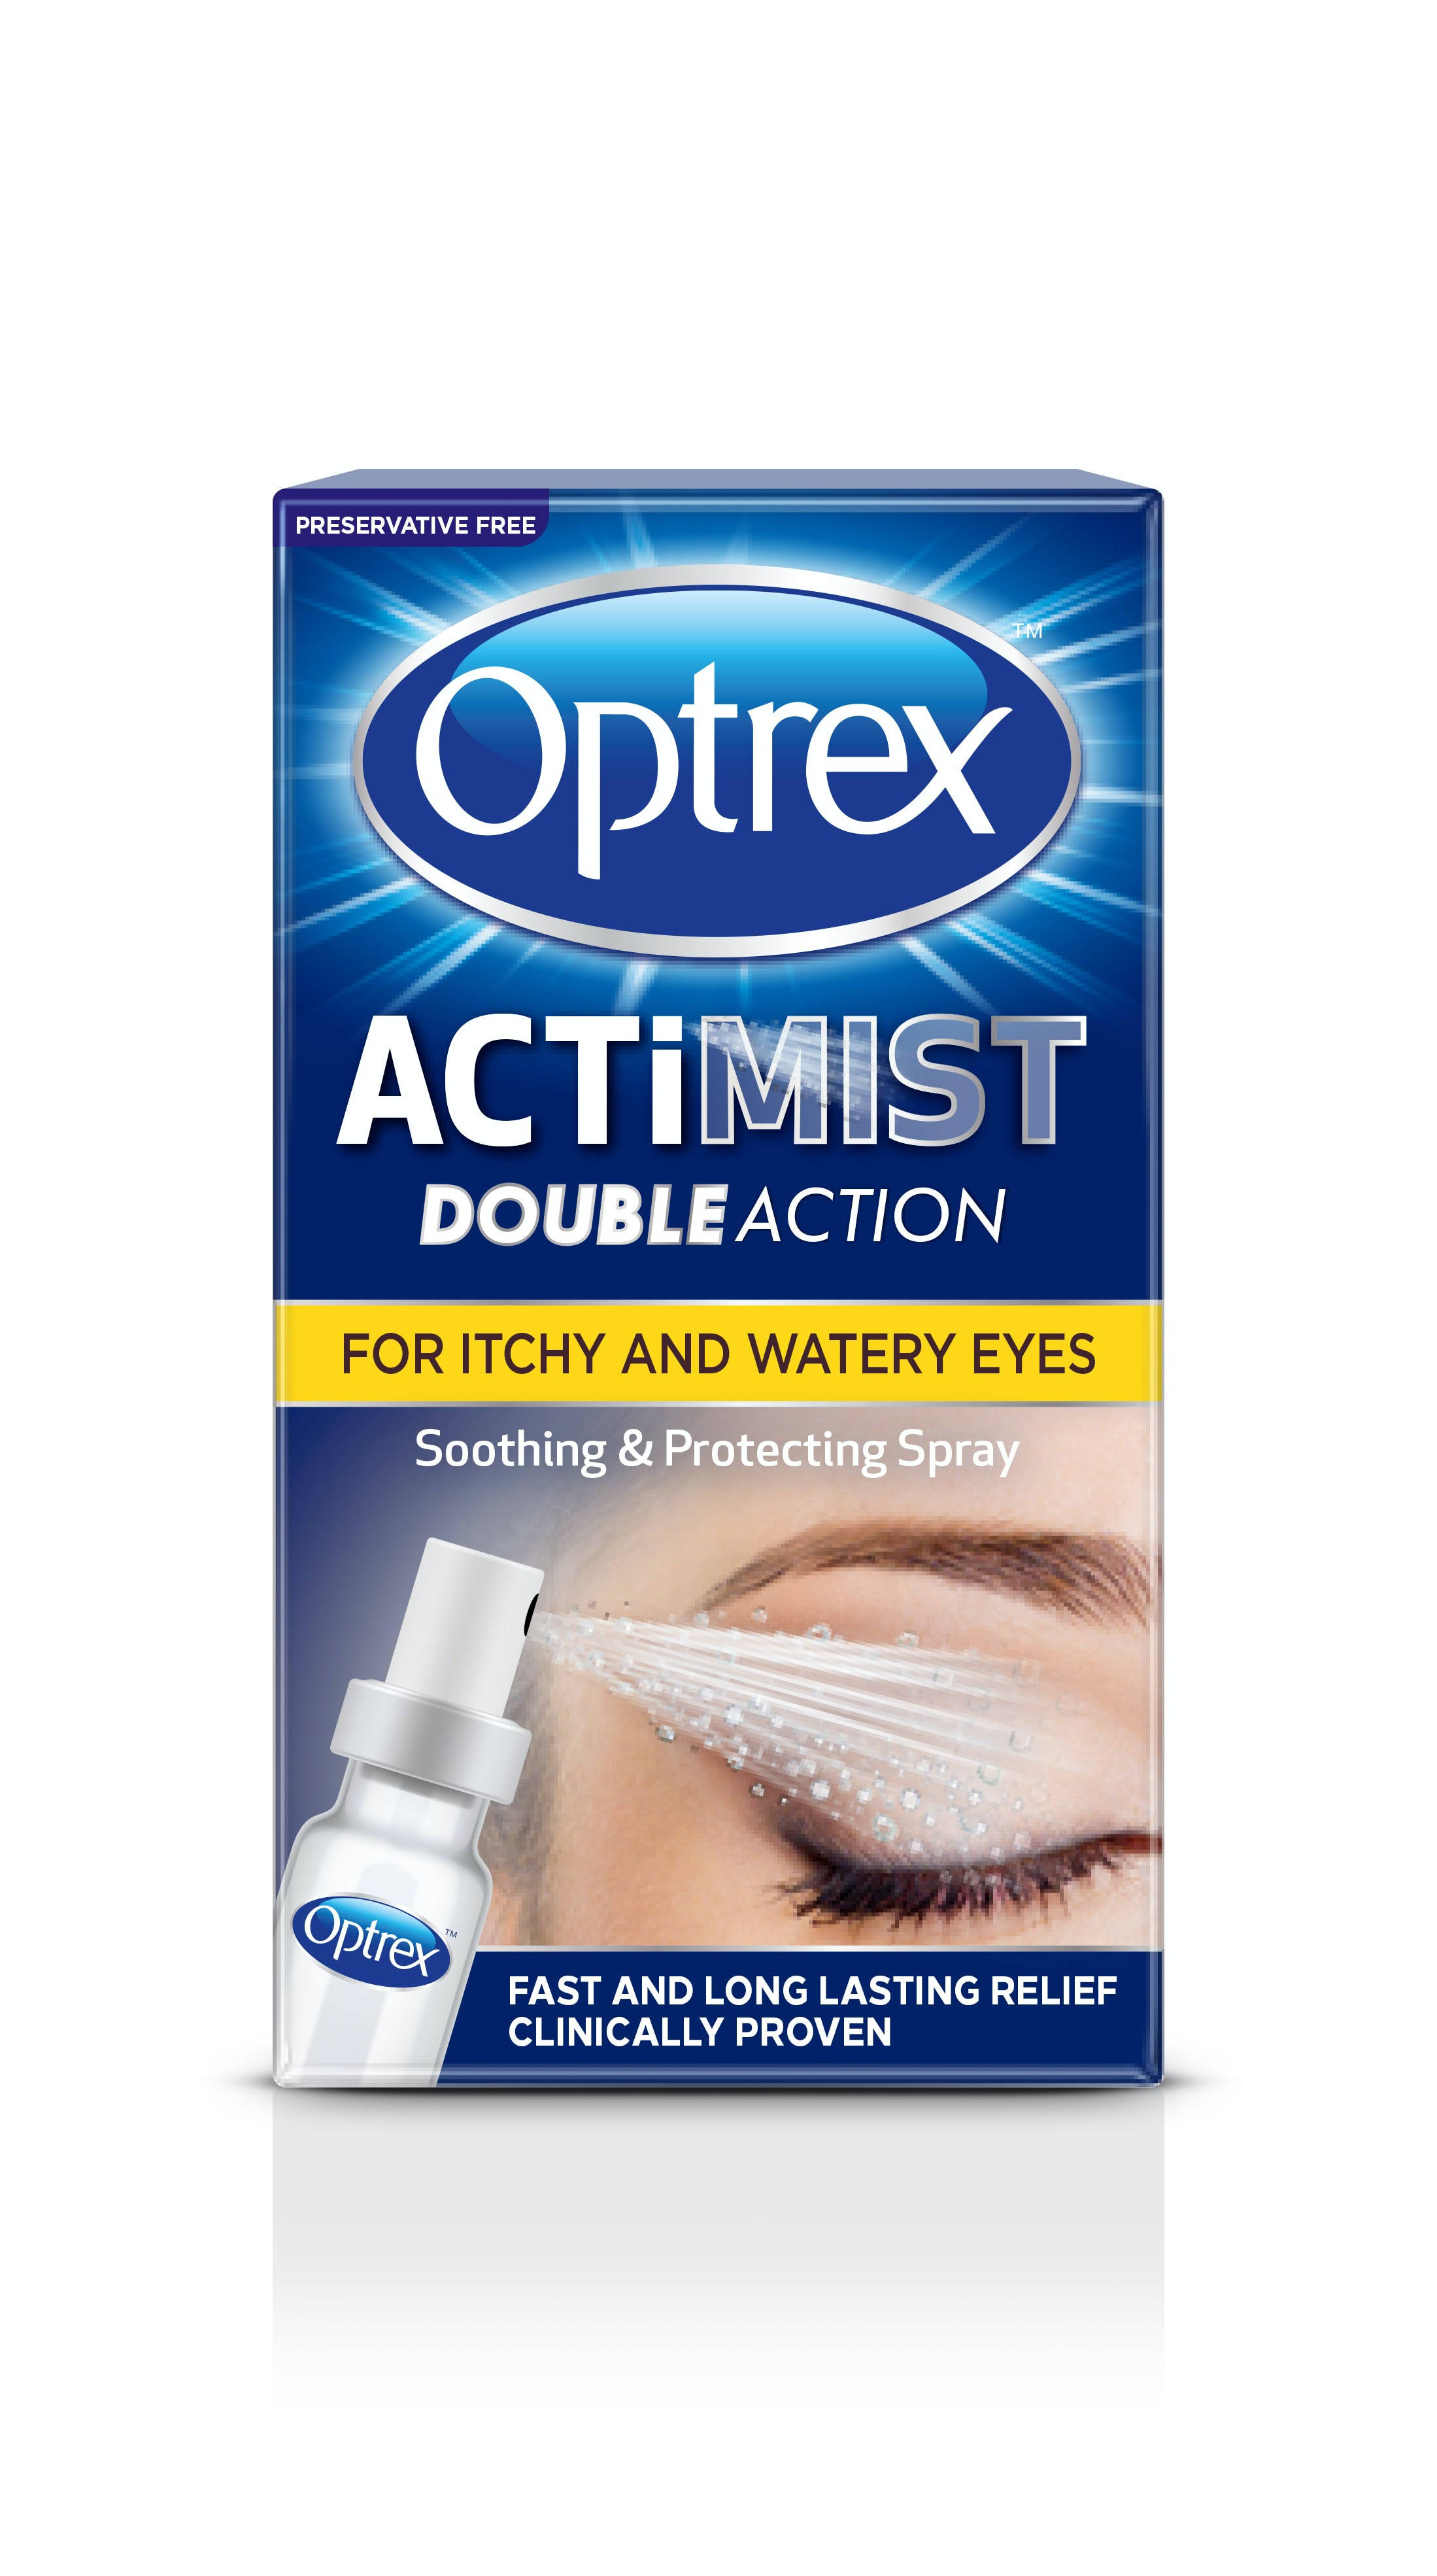 Optrex Actimist Soothing and Protecting Spray - 10ml